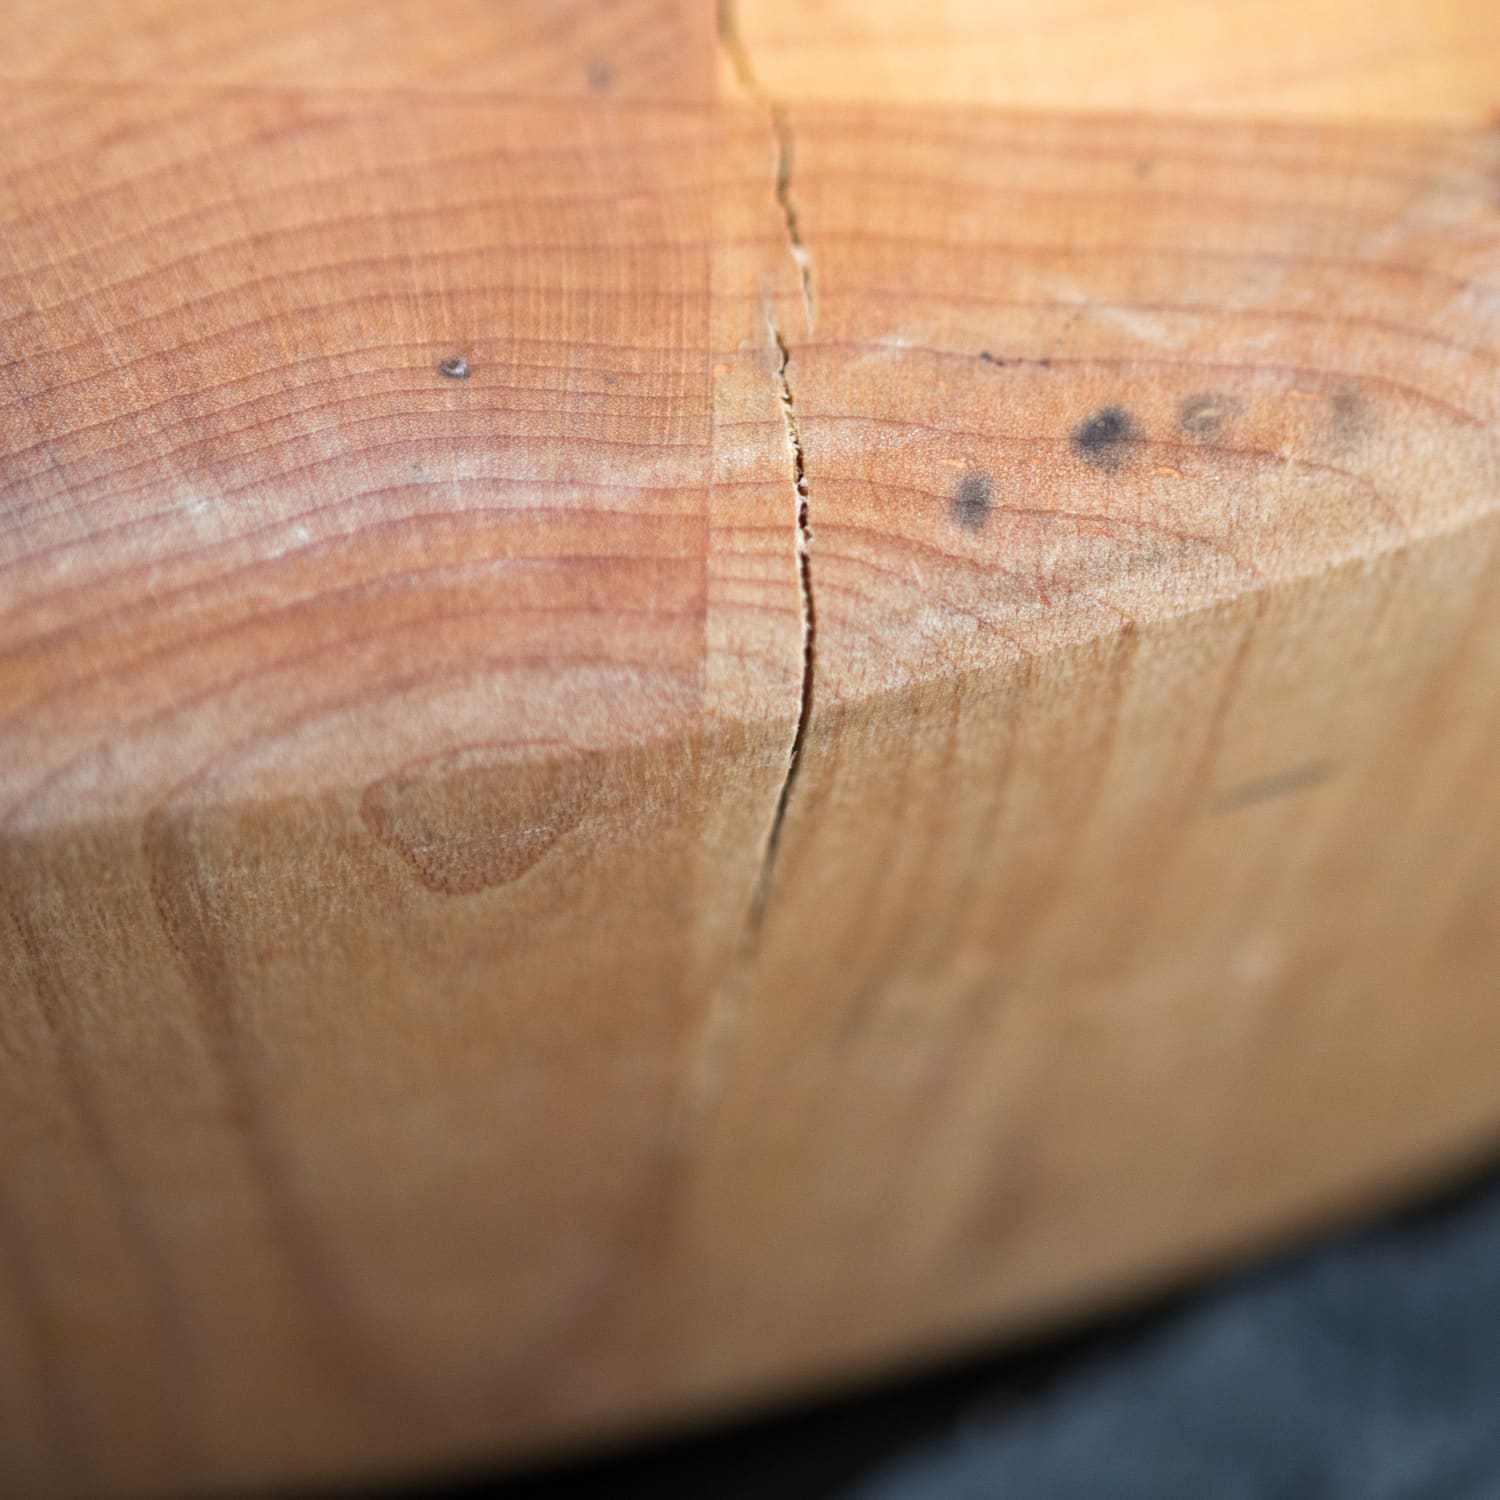 How To Repair Small Cracks In a Butcher Block or Cutting Board